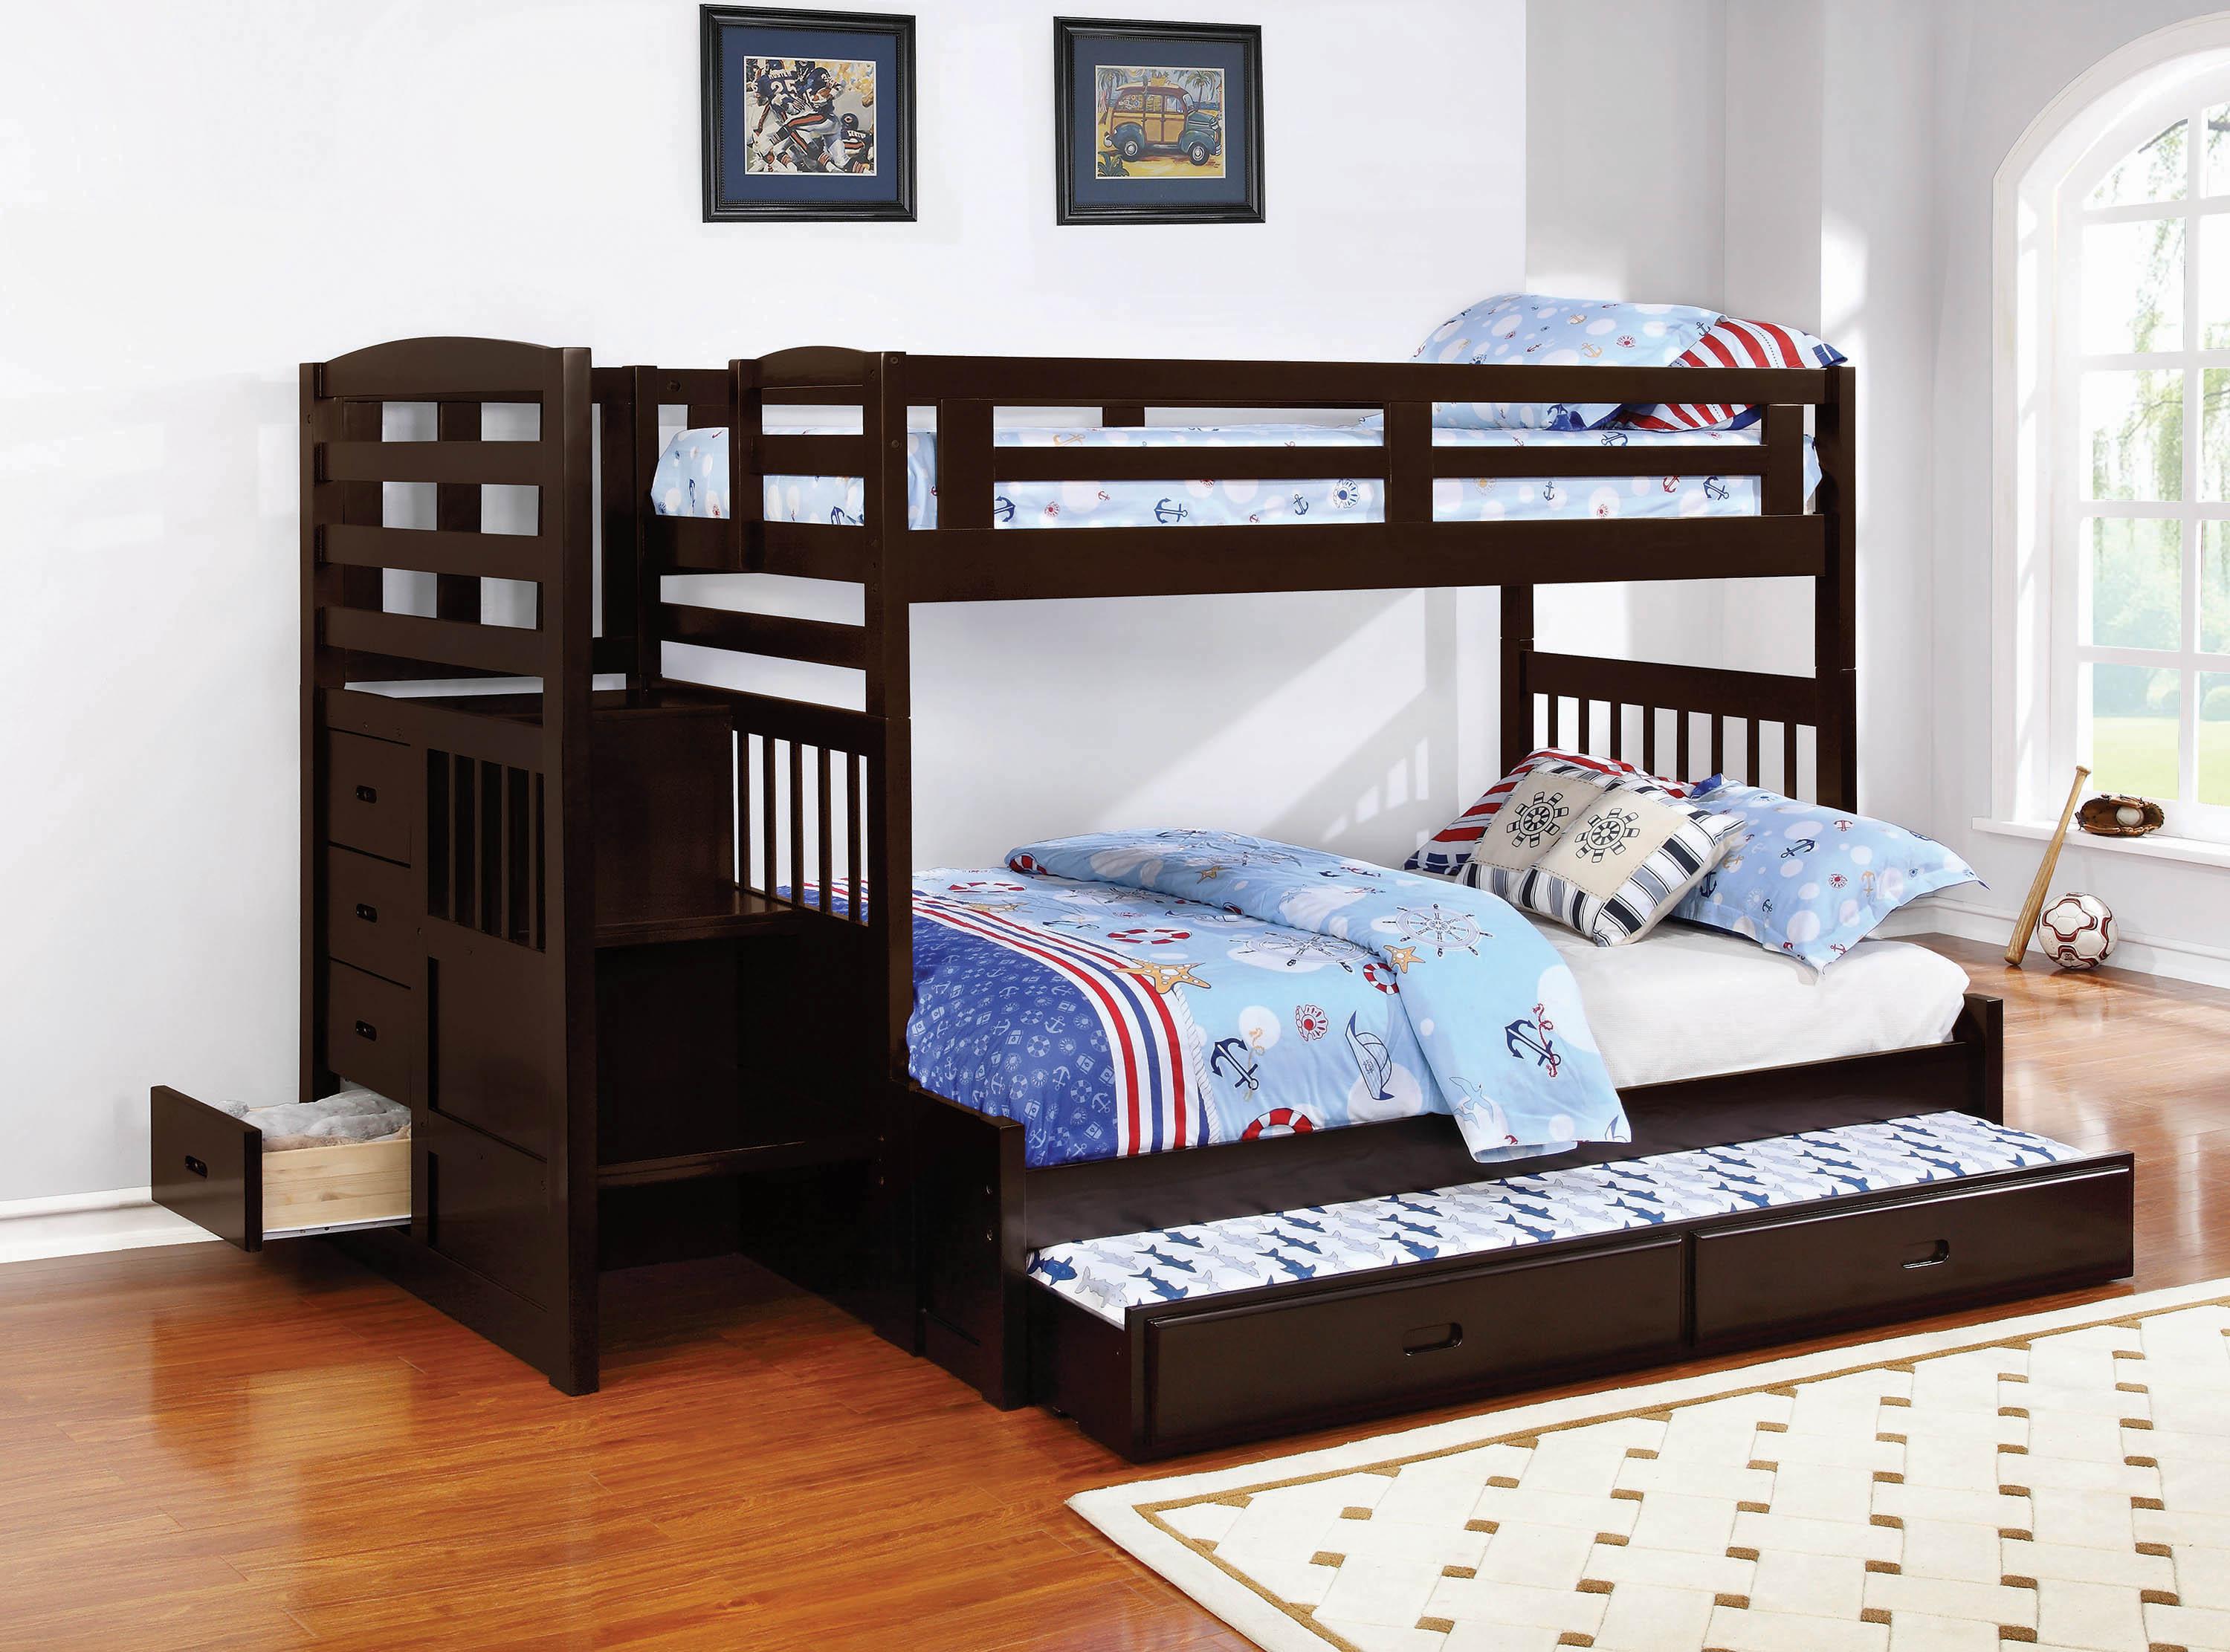 Transitional Bunk Bed w/Trundle 460366 Dublin 460366-STORAGE in Cappuccino 